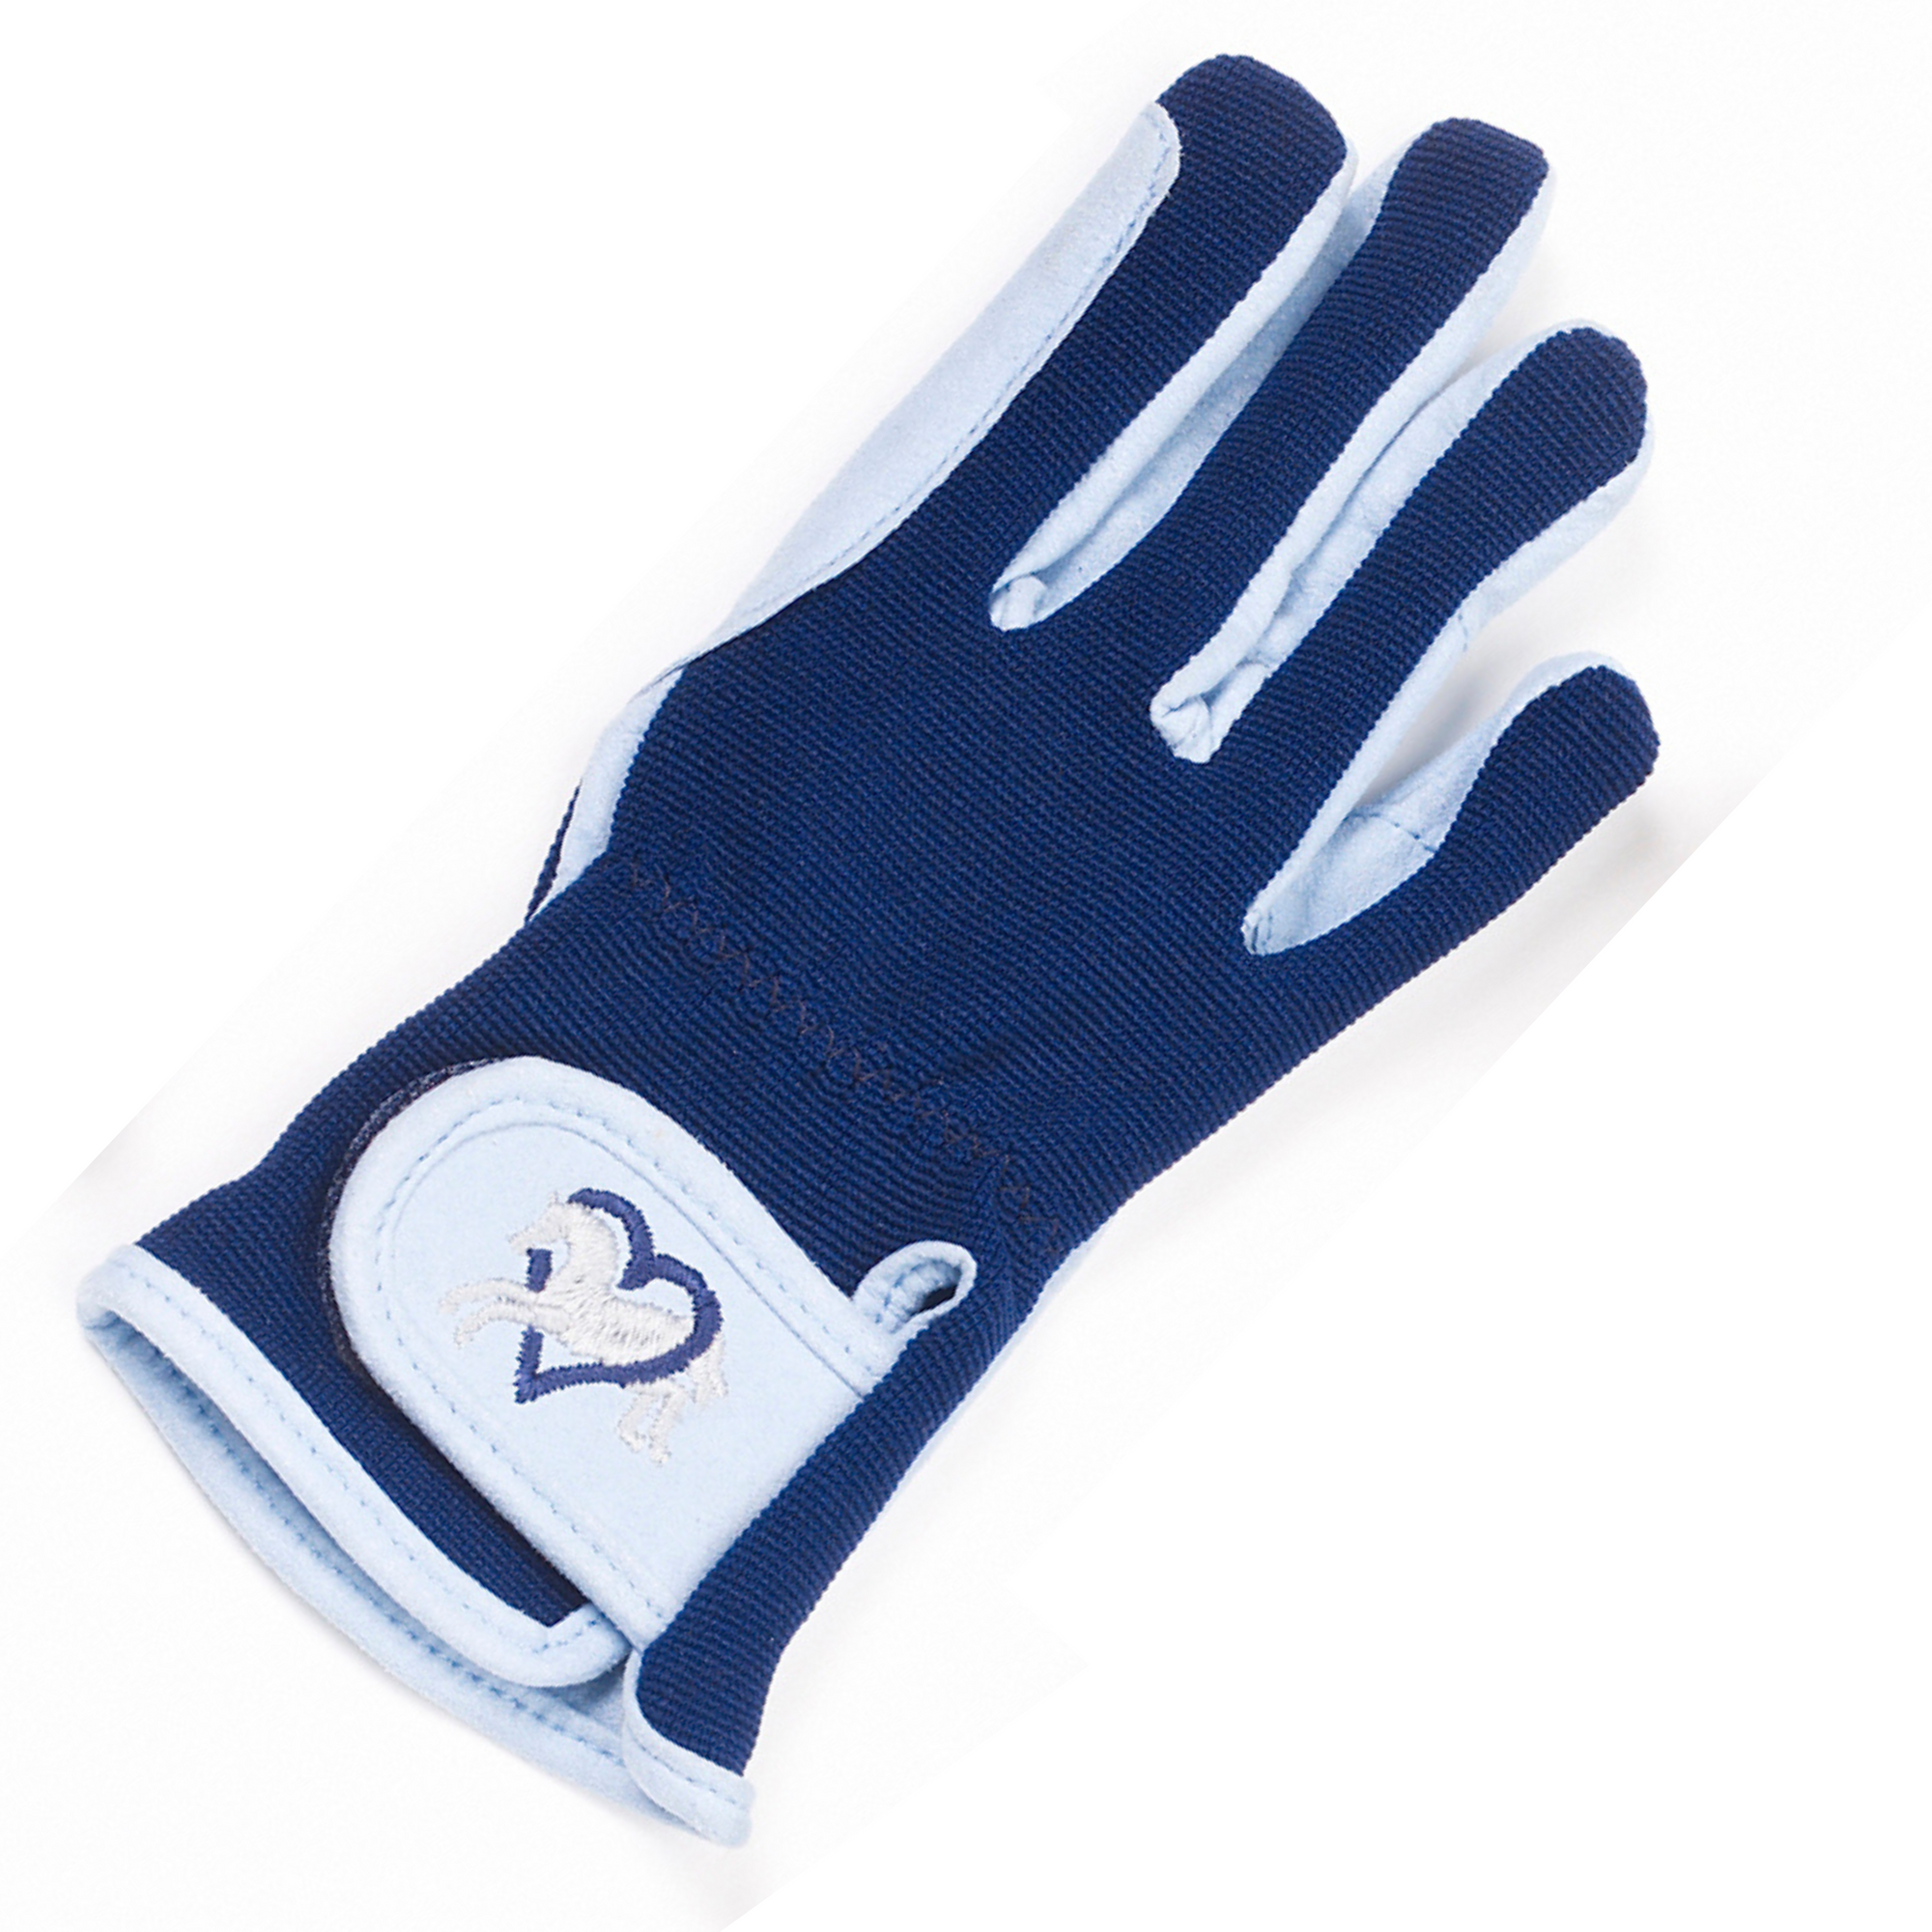 Ovation Hearts & Horses Glove in Sky Blue/Navy - Children's Small (4-4.5)